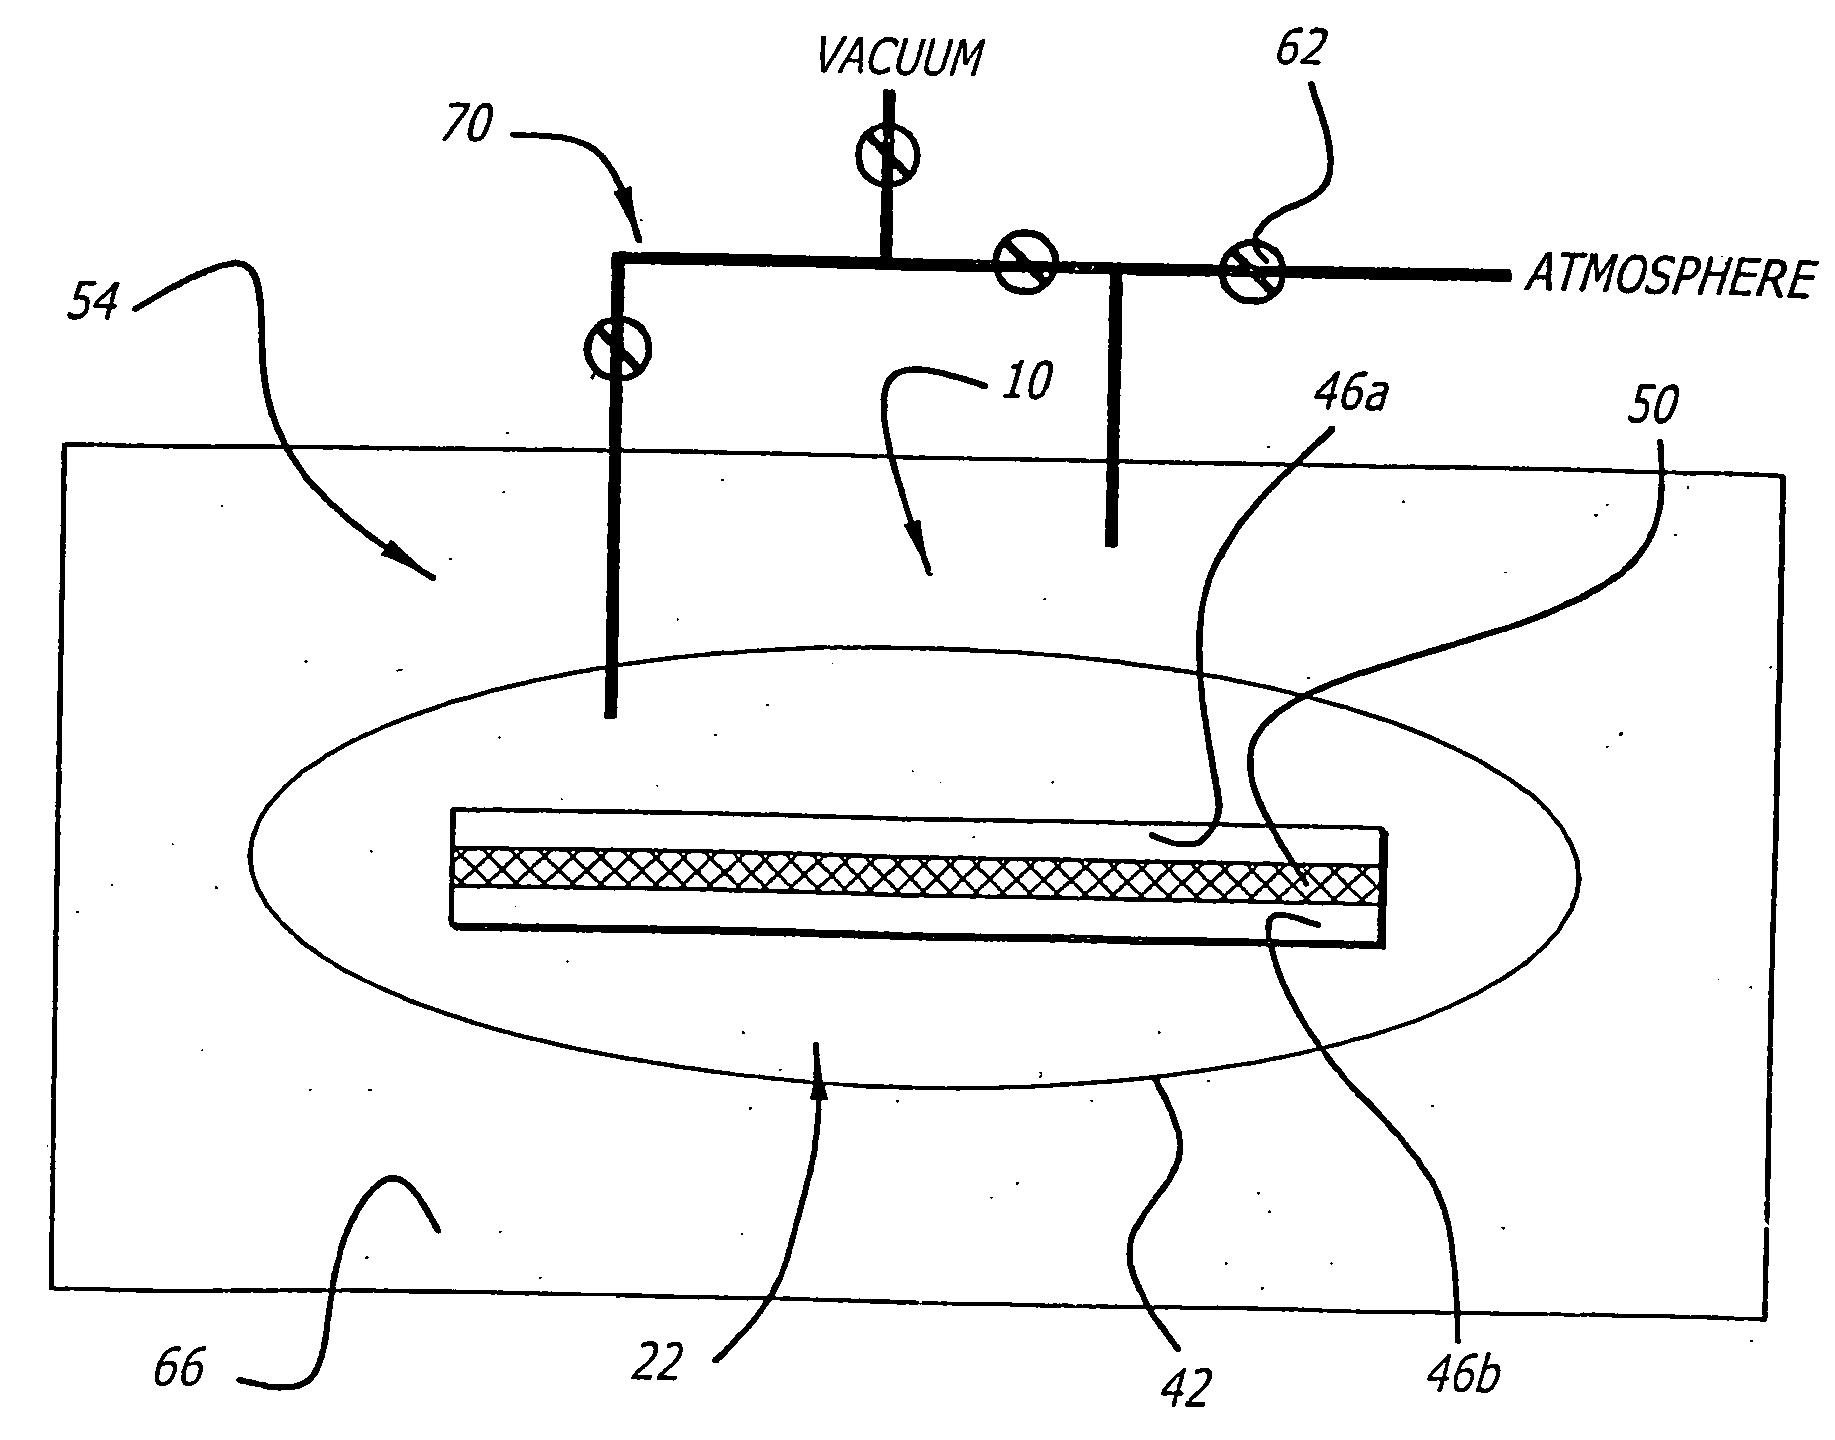 System and method for vacuum bag fabrication